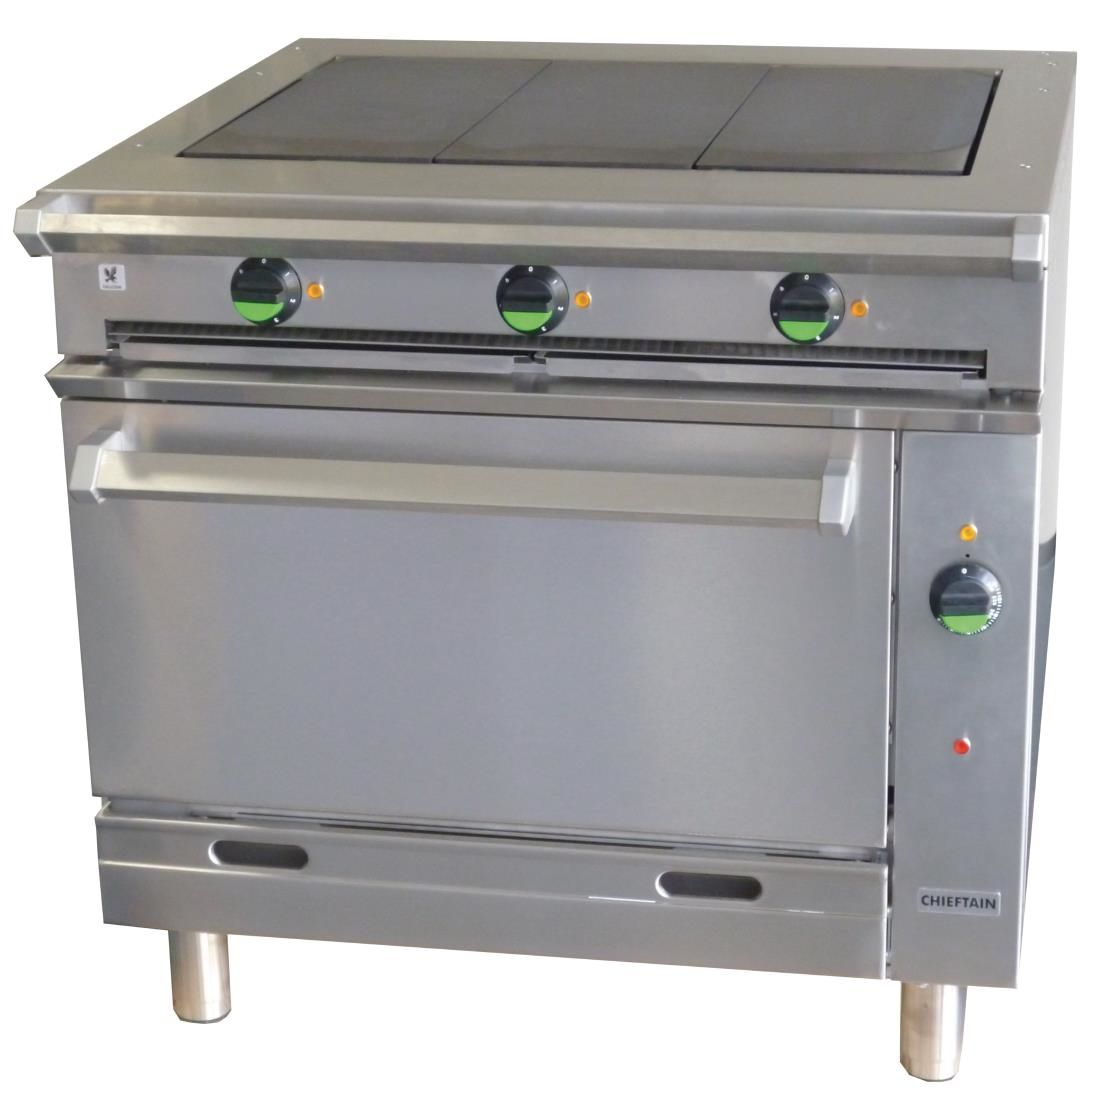 Falcon Chieftain Electric 3 Hotplate Range E1006X JD Catering Equipment Solutions Ltd